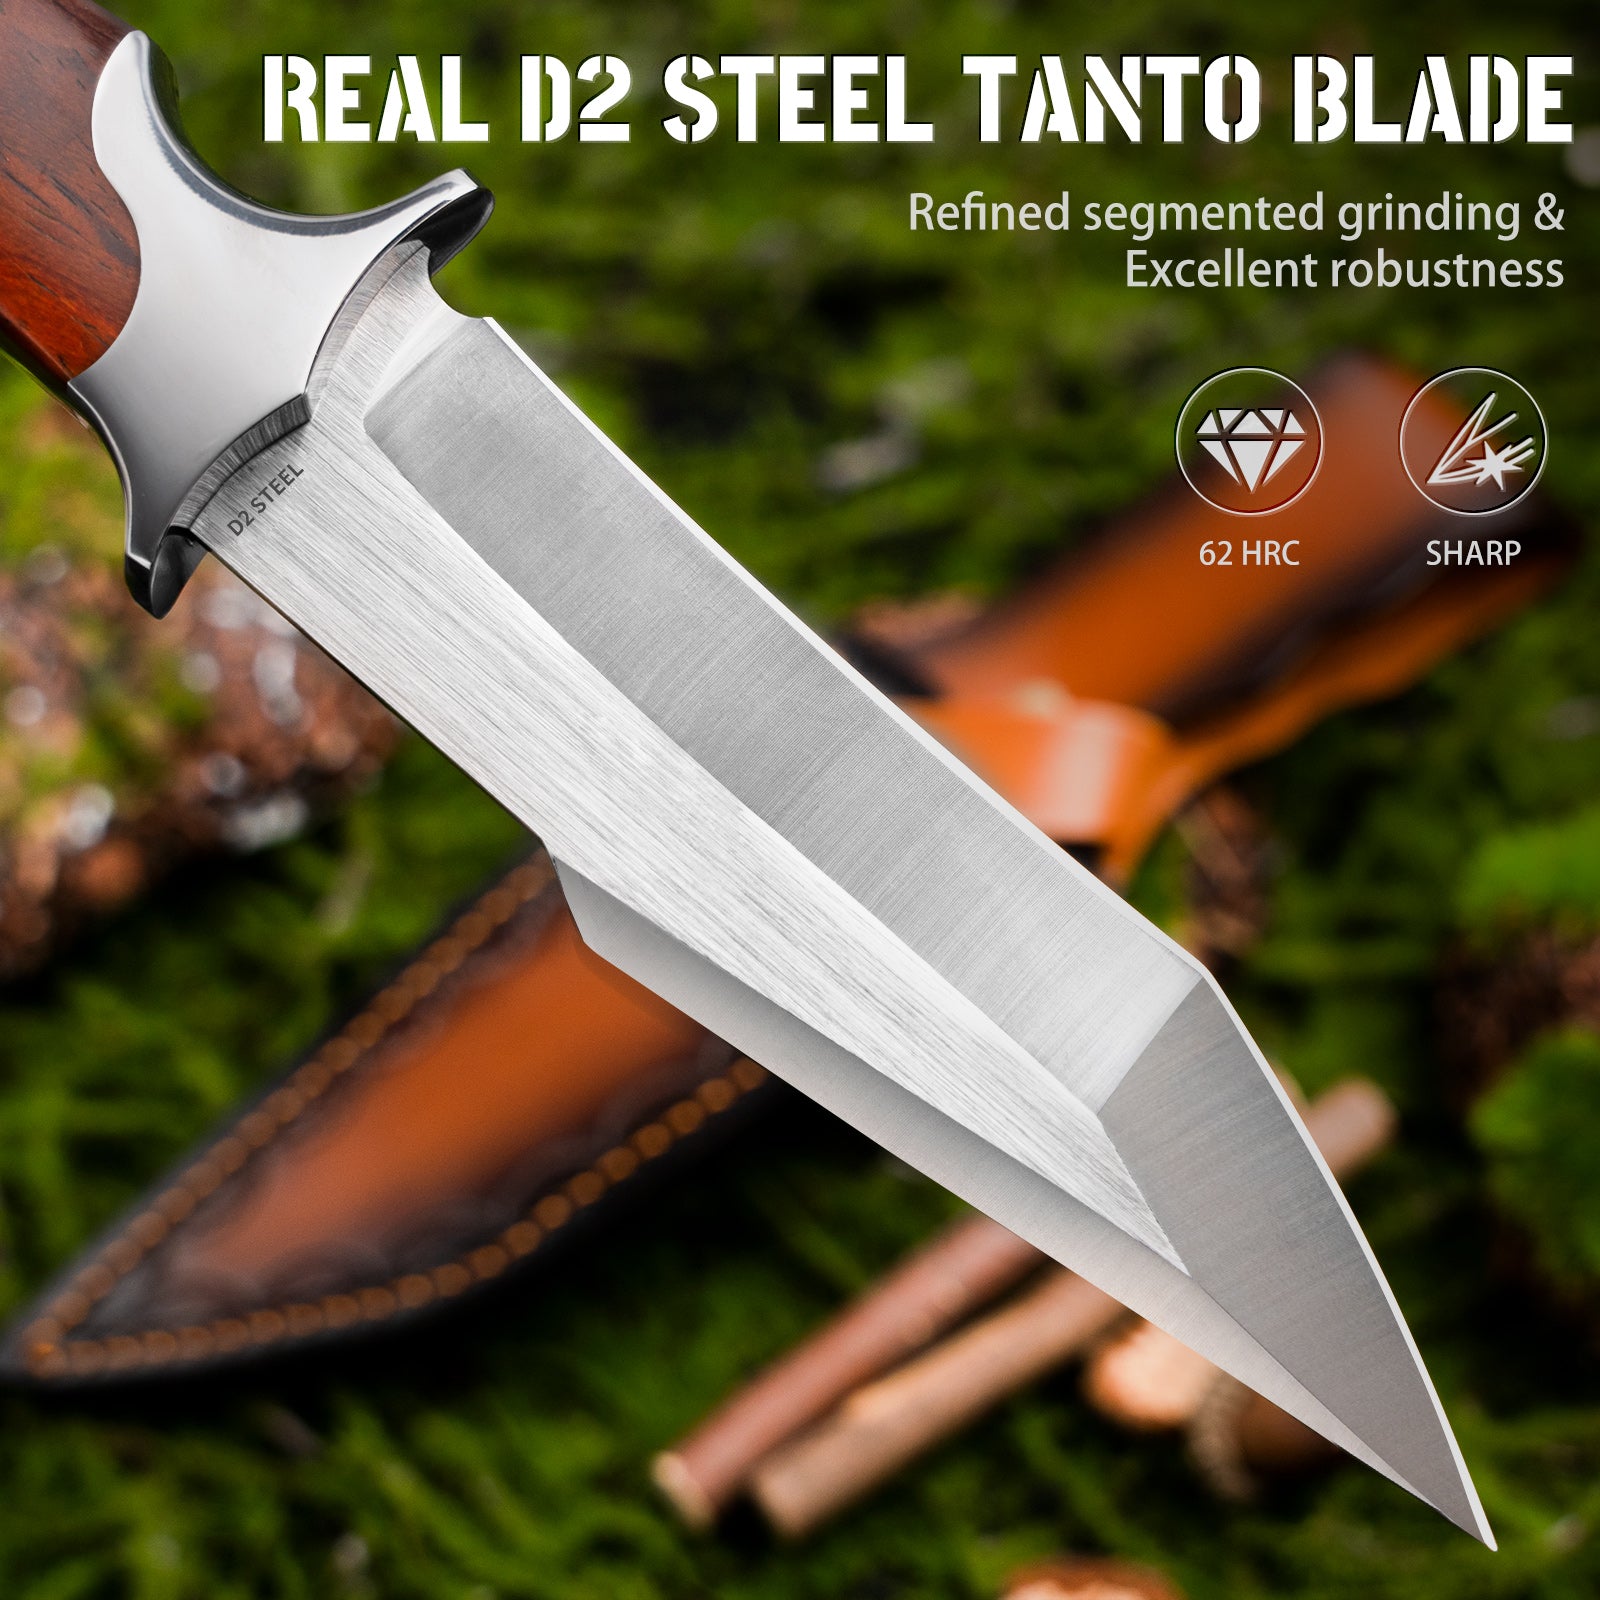  Real Steel Bushcraft III Hunting Knife - D2 Blade and